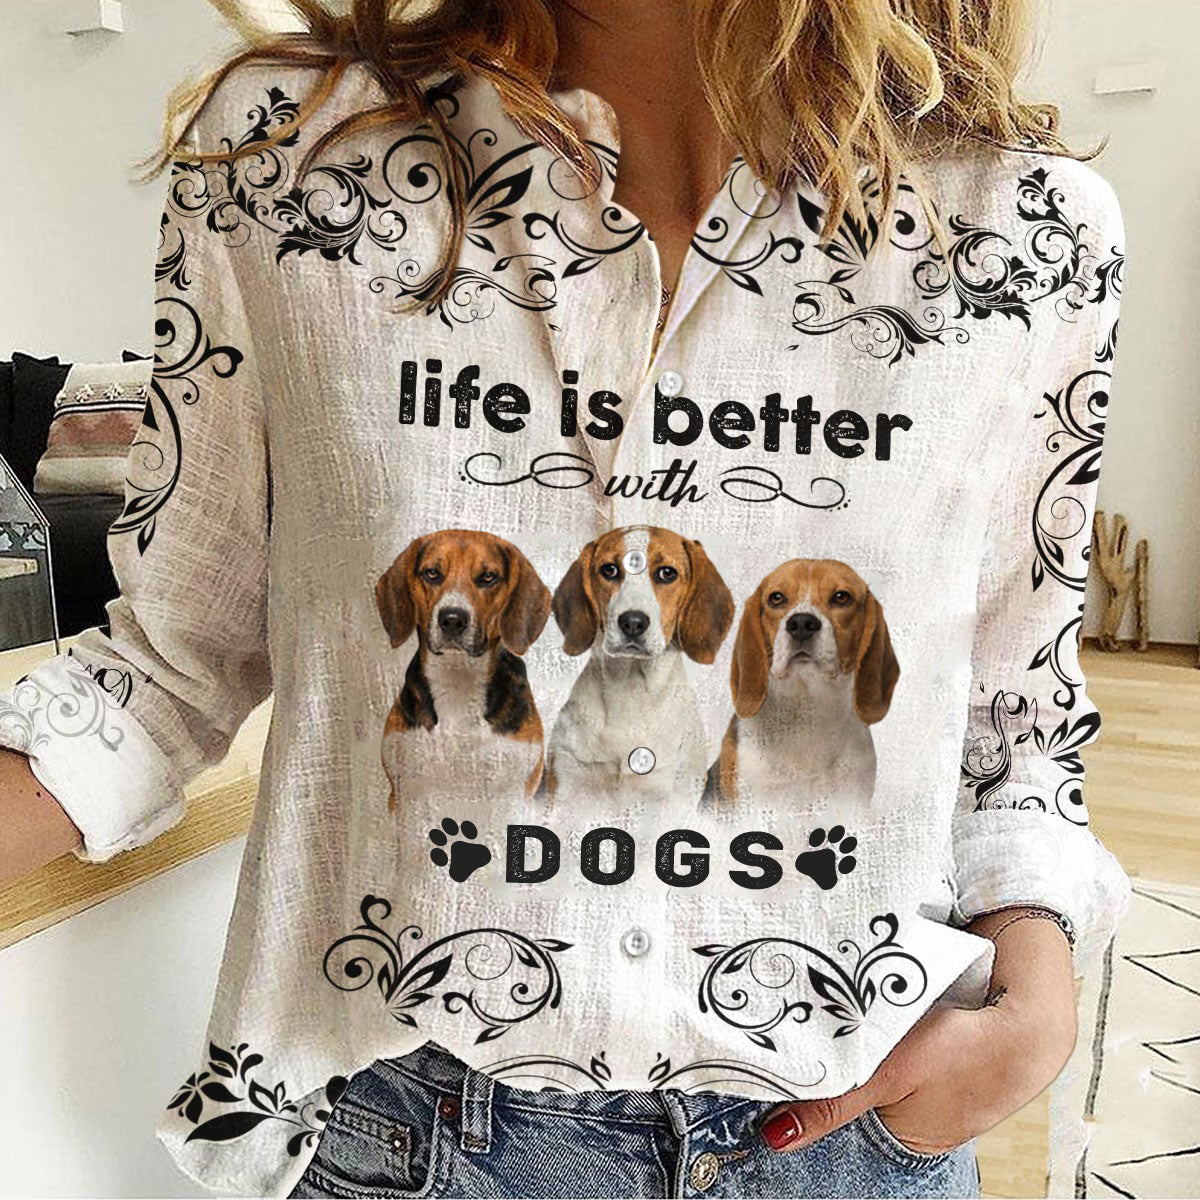 Beagle -Life Is Better With Dogs Women's Long-Sleeve Shirt